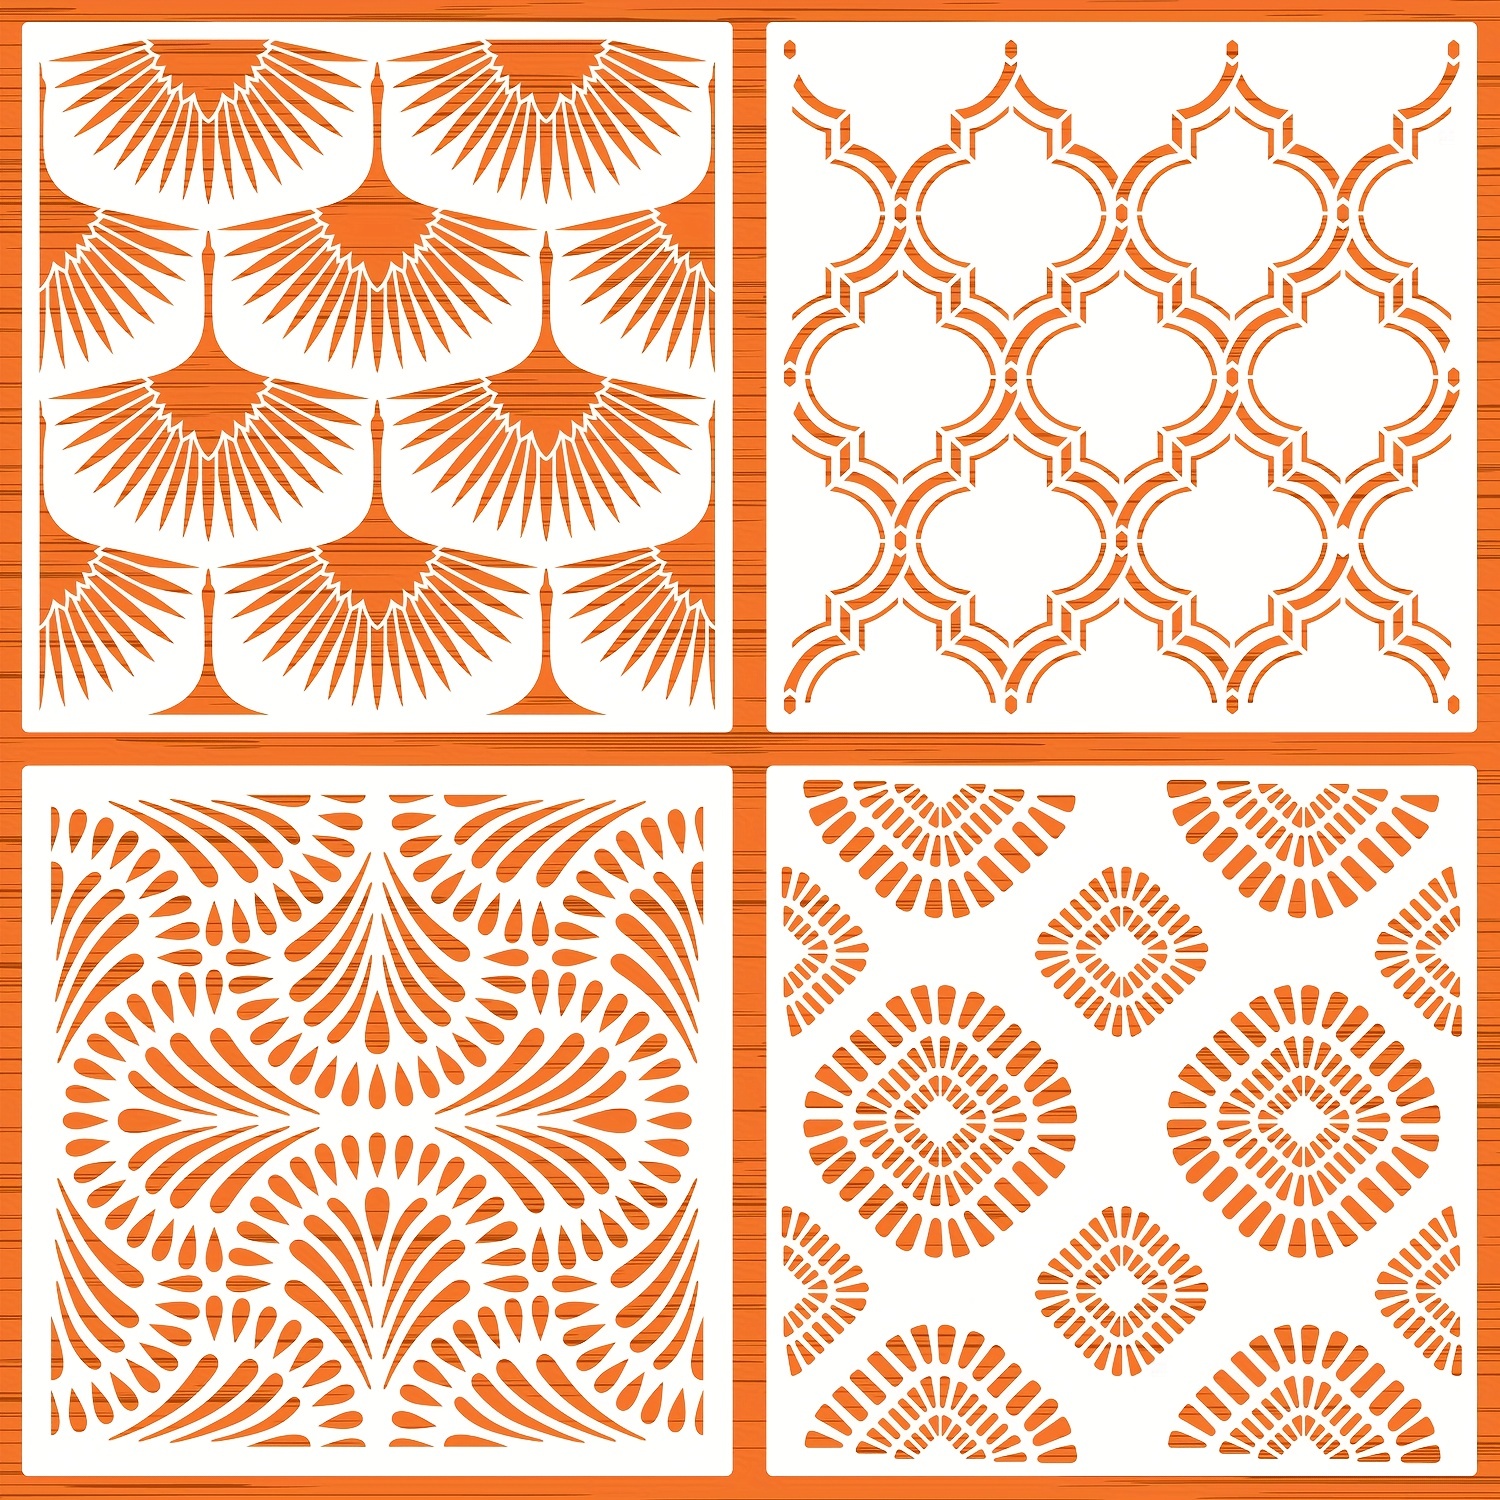 Modern geometric stencils for painting walls, floors, tile and furniture